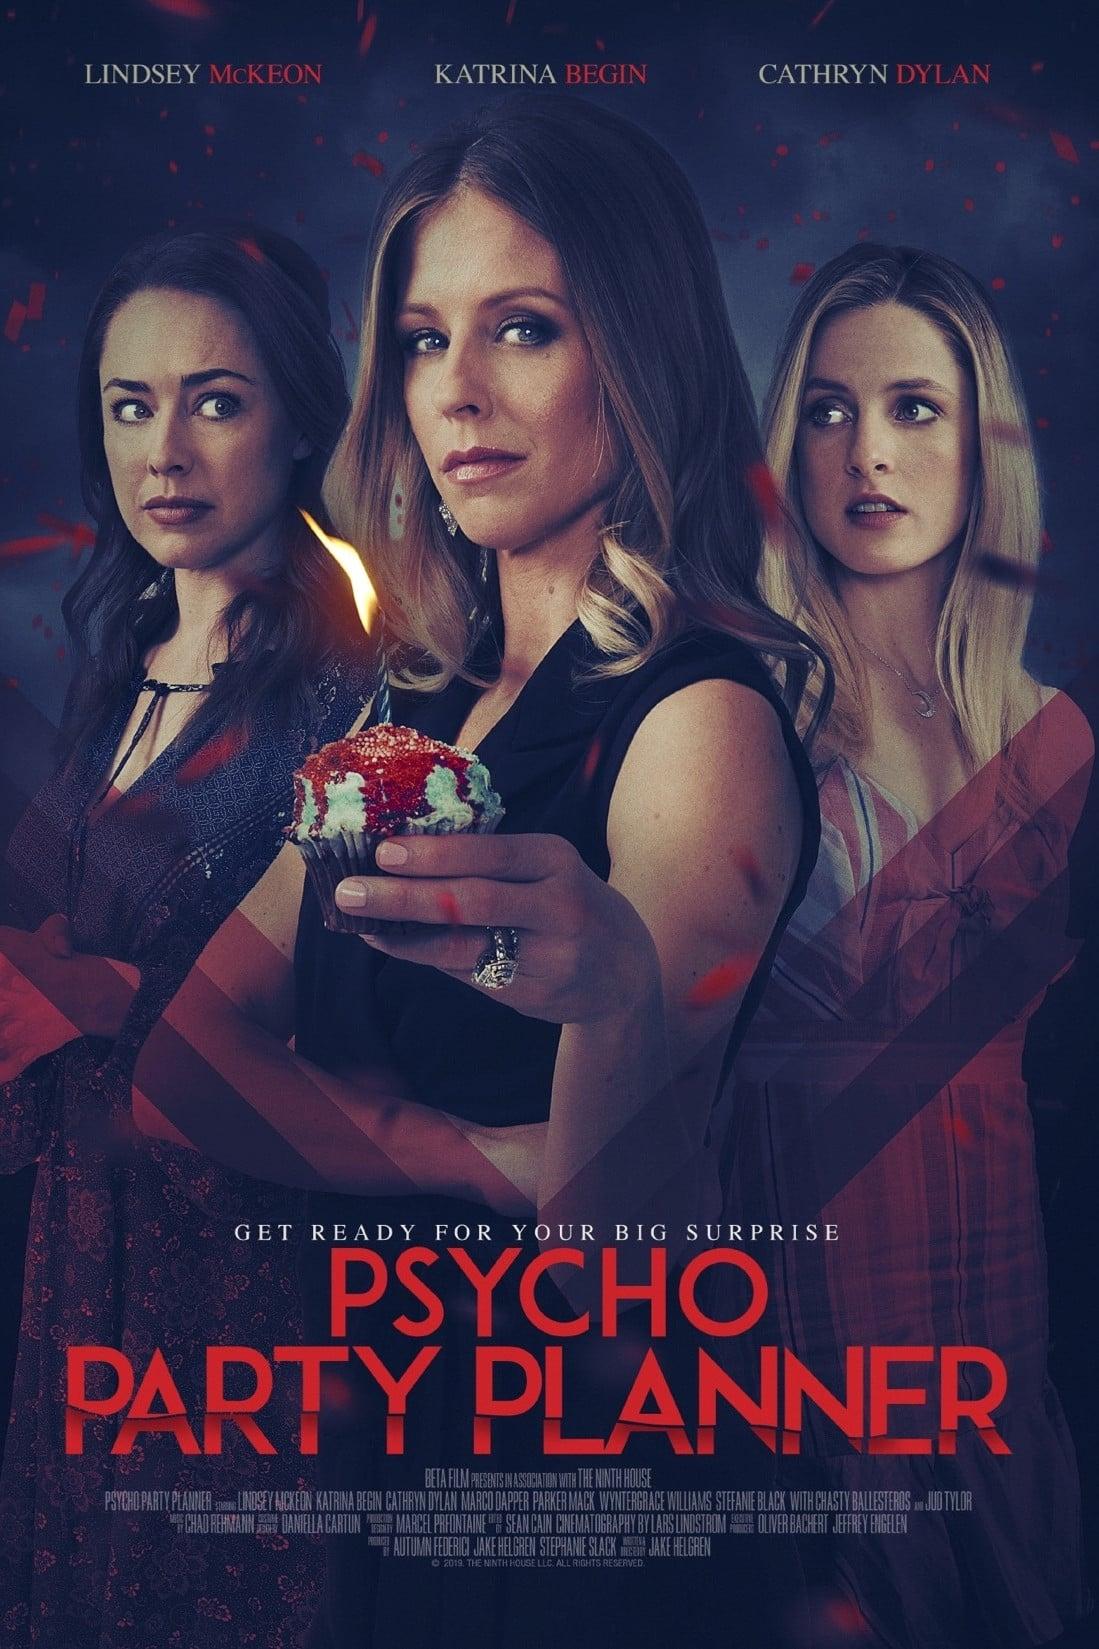 Psycho Party Planner poster